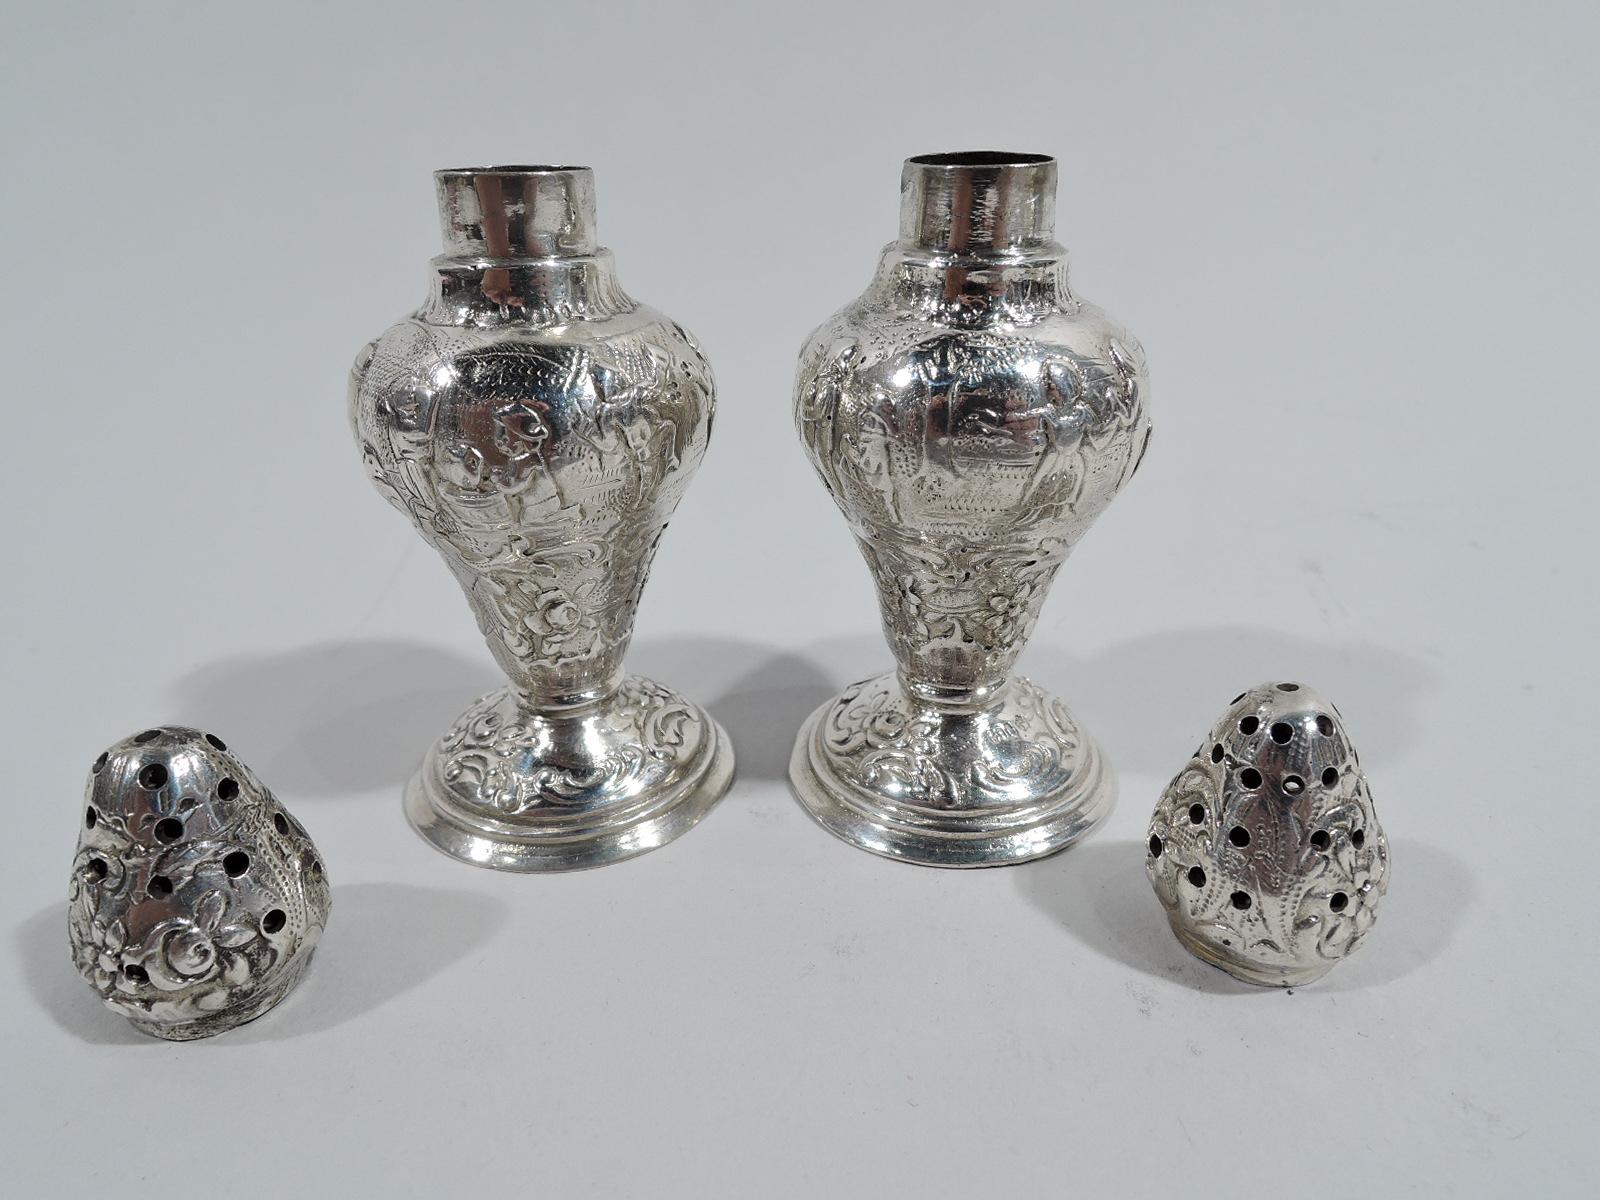 Pair of German 800 silver salt and pepper shakers, ca 1910. Each: Baluster on stepped and domed foot. Pierced ovoid cover. Chased ornament depicting rustic revels with jiggers and topers. Marked. Total weight: 1.7 troy ounces.